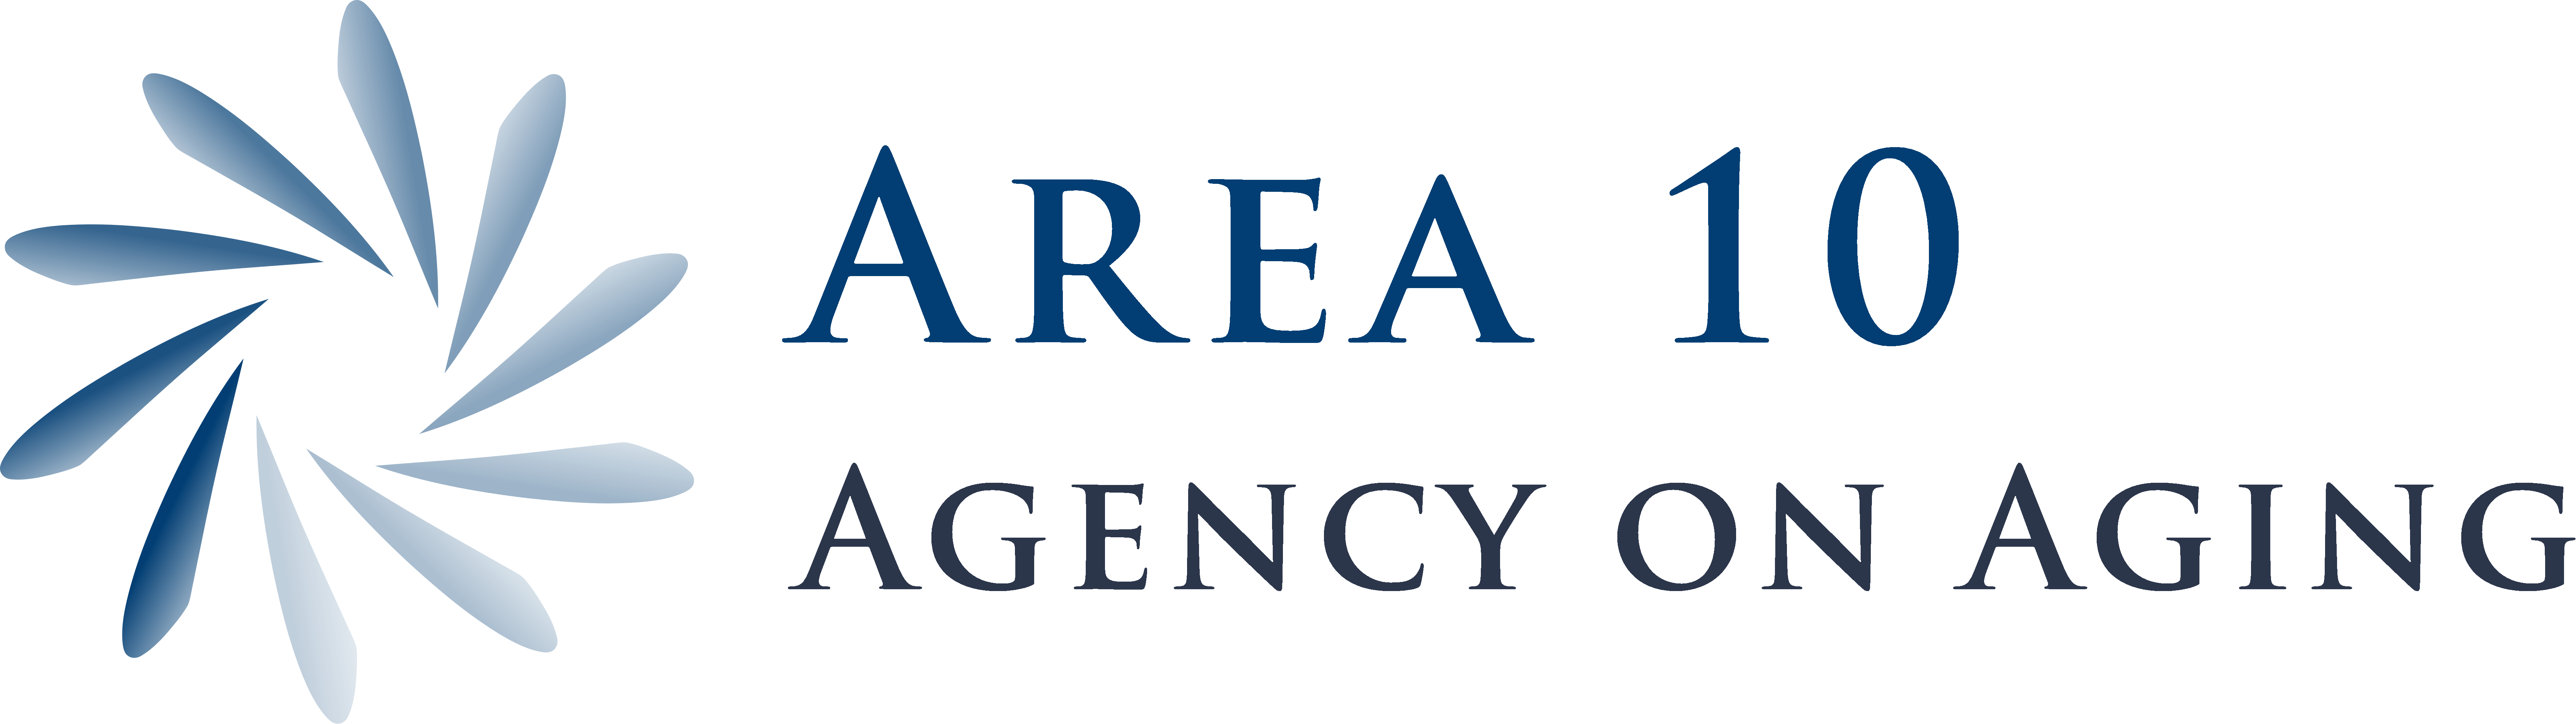 Area 10 Agency On Aging